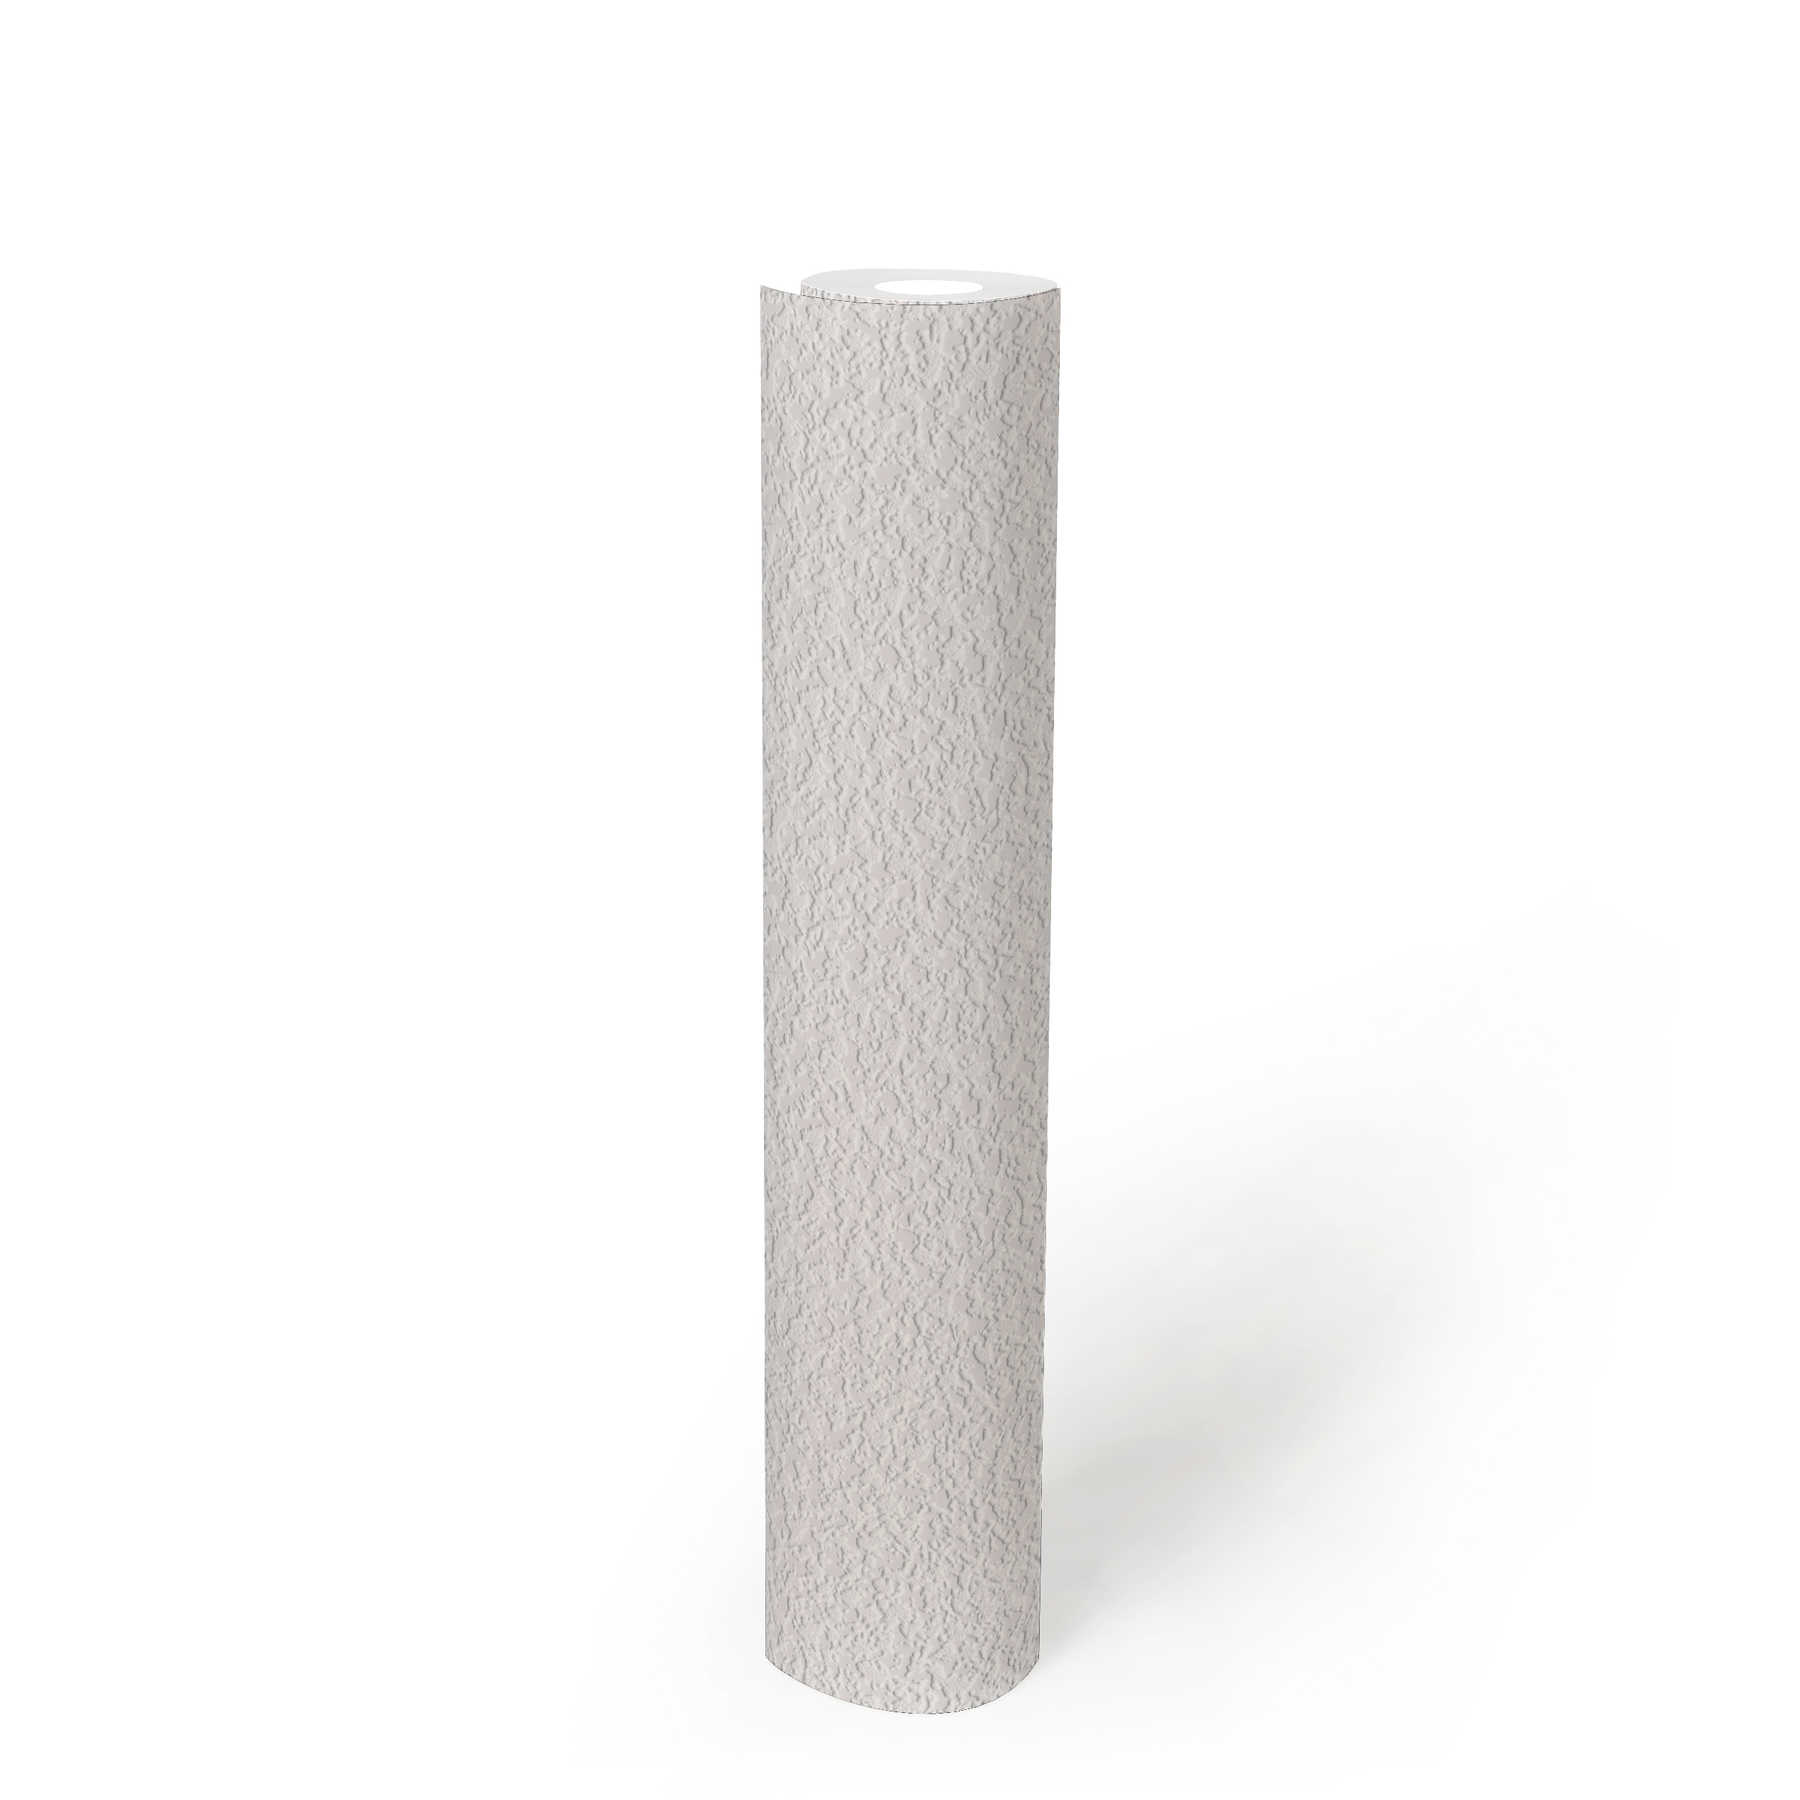             Structured wallpaper with three-dimensional effect - white
        